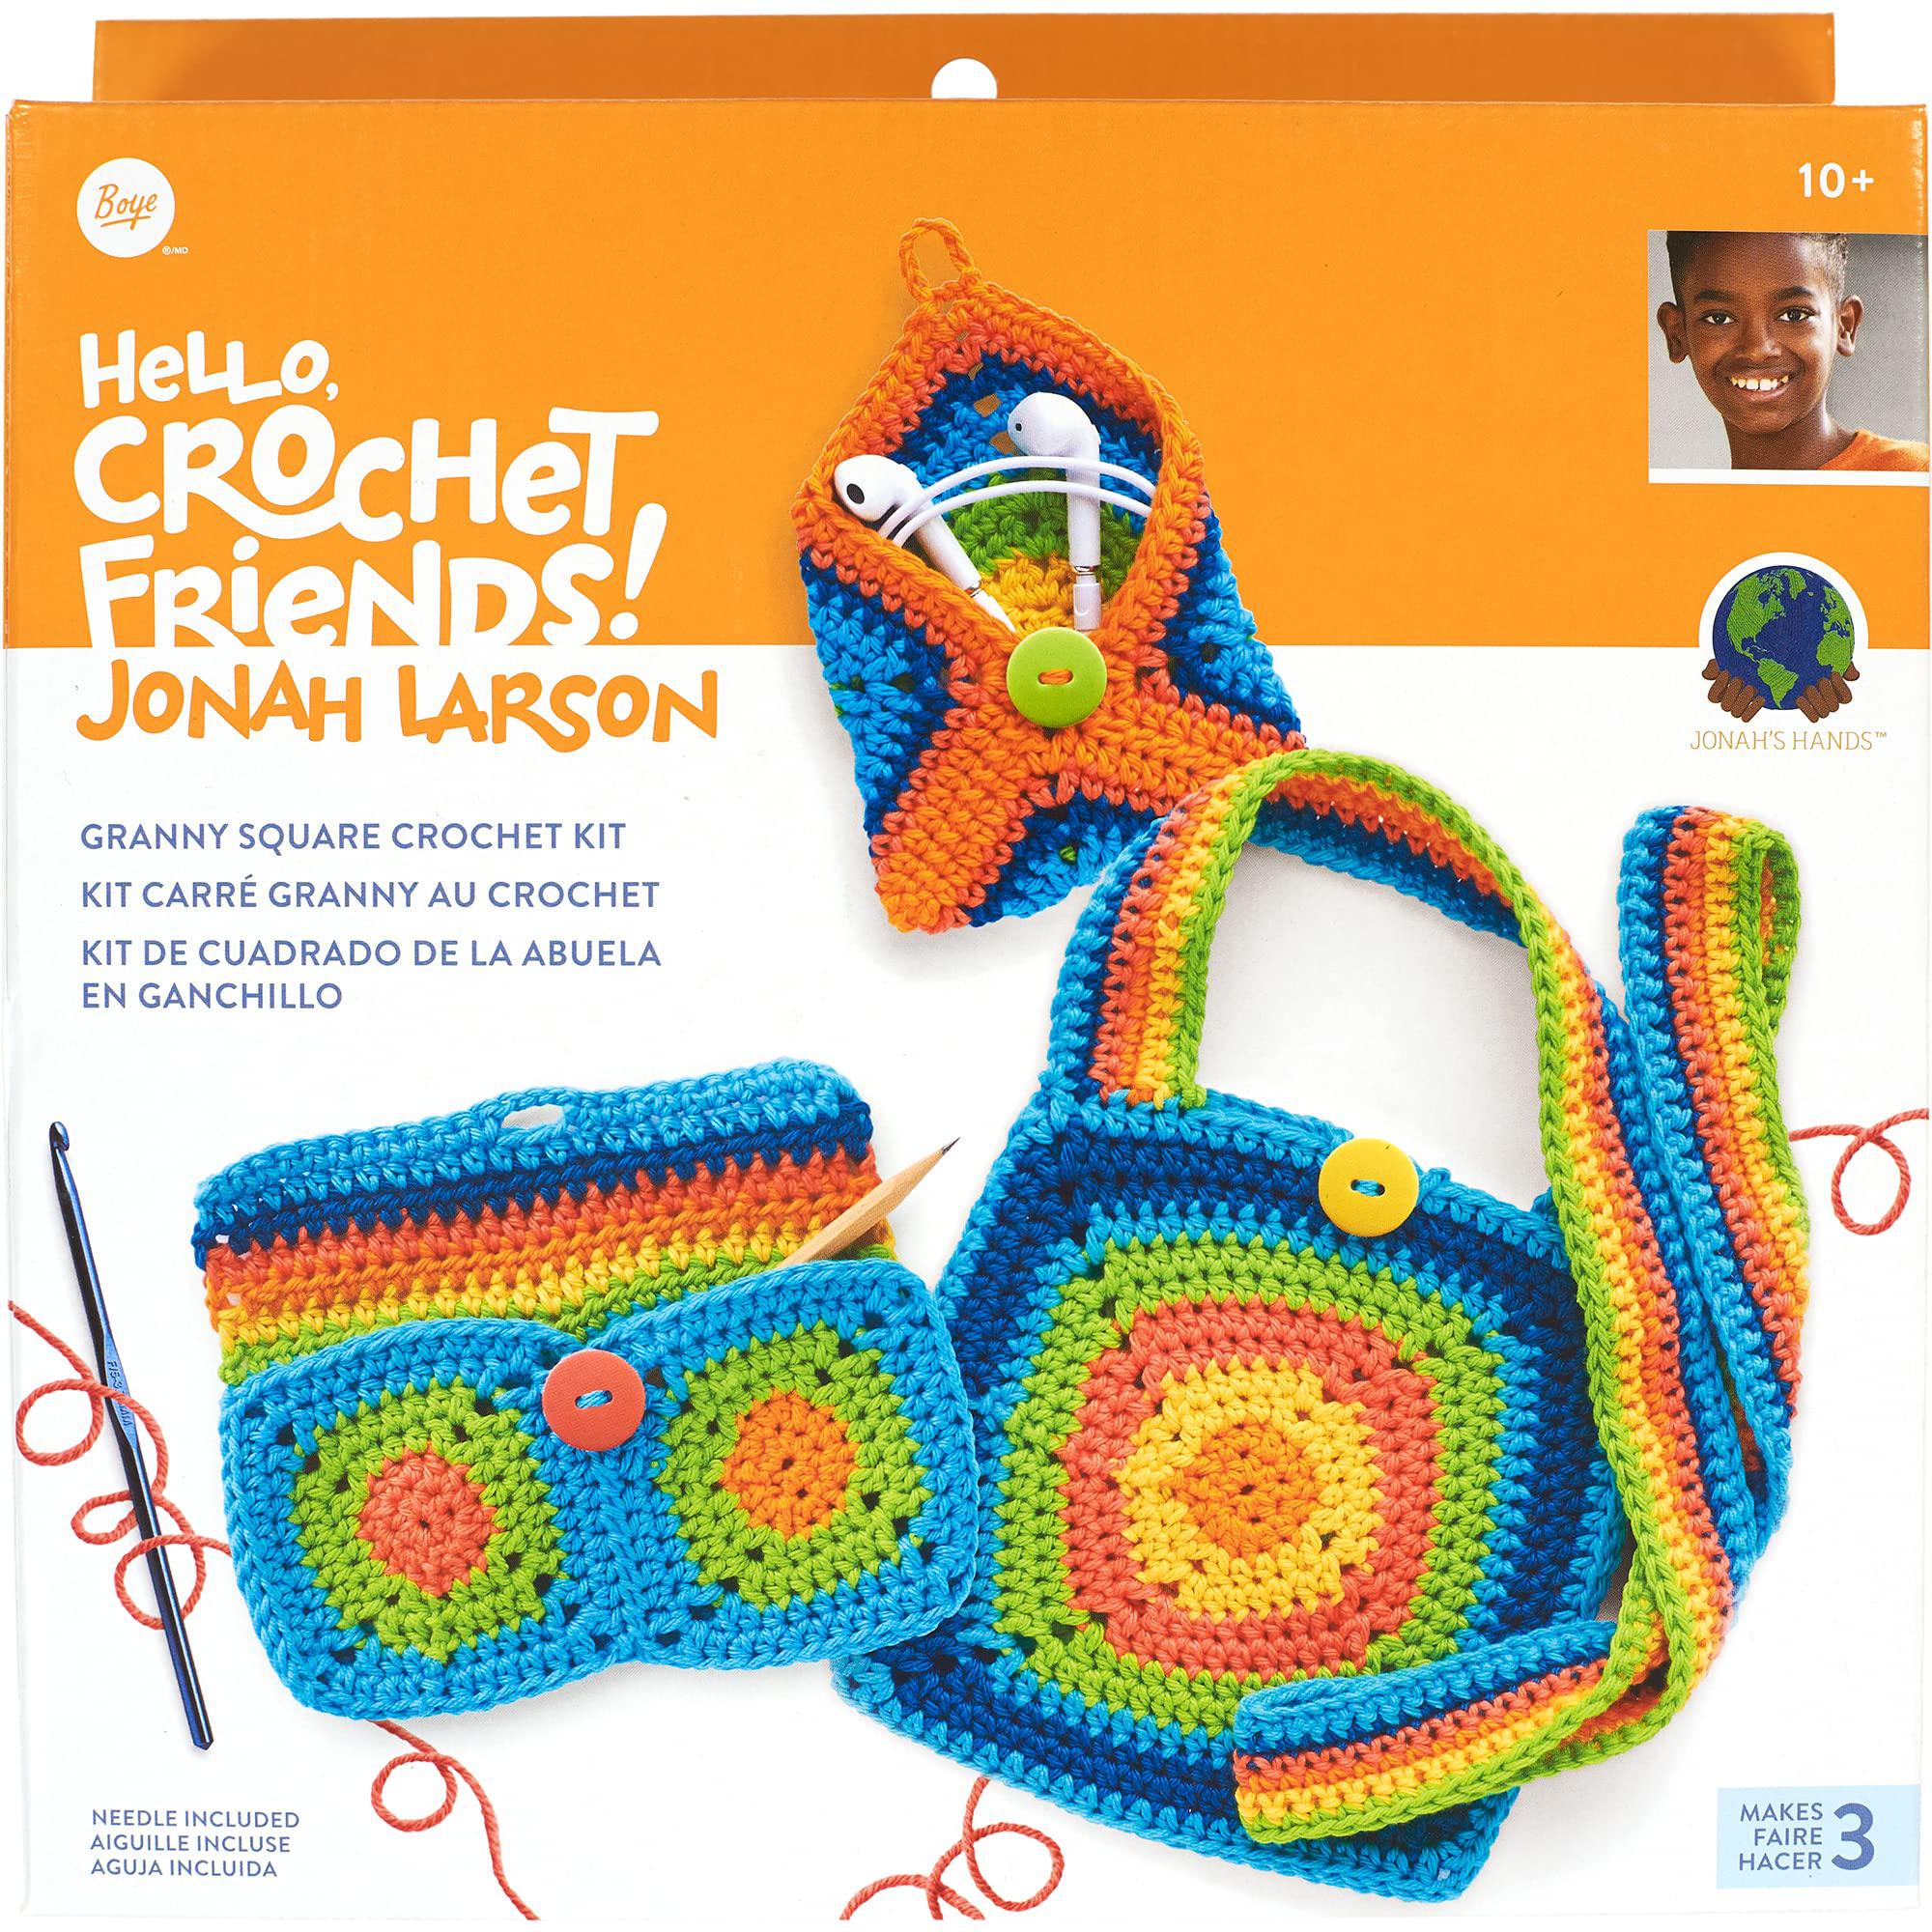 Boye boye jonah's hands granny square accessories beginners crochet kit for  kids and adults, makes 3 projects, multicolor 8 piece